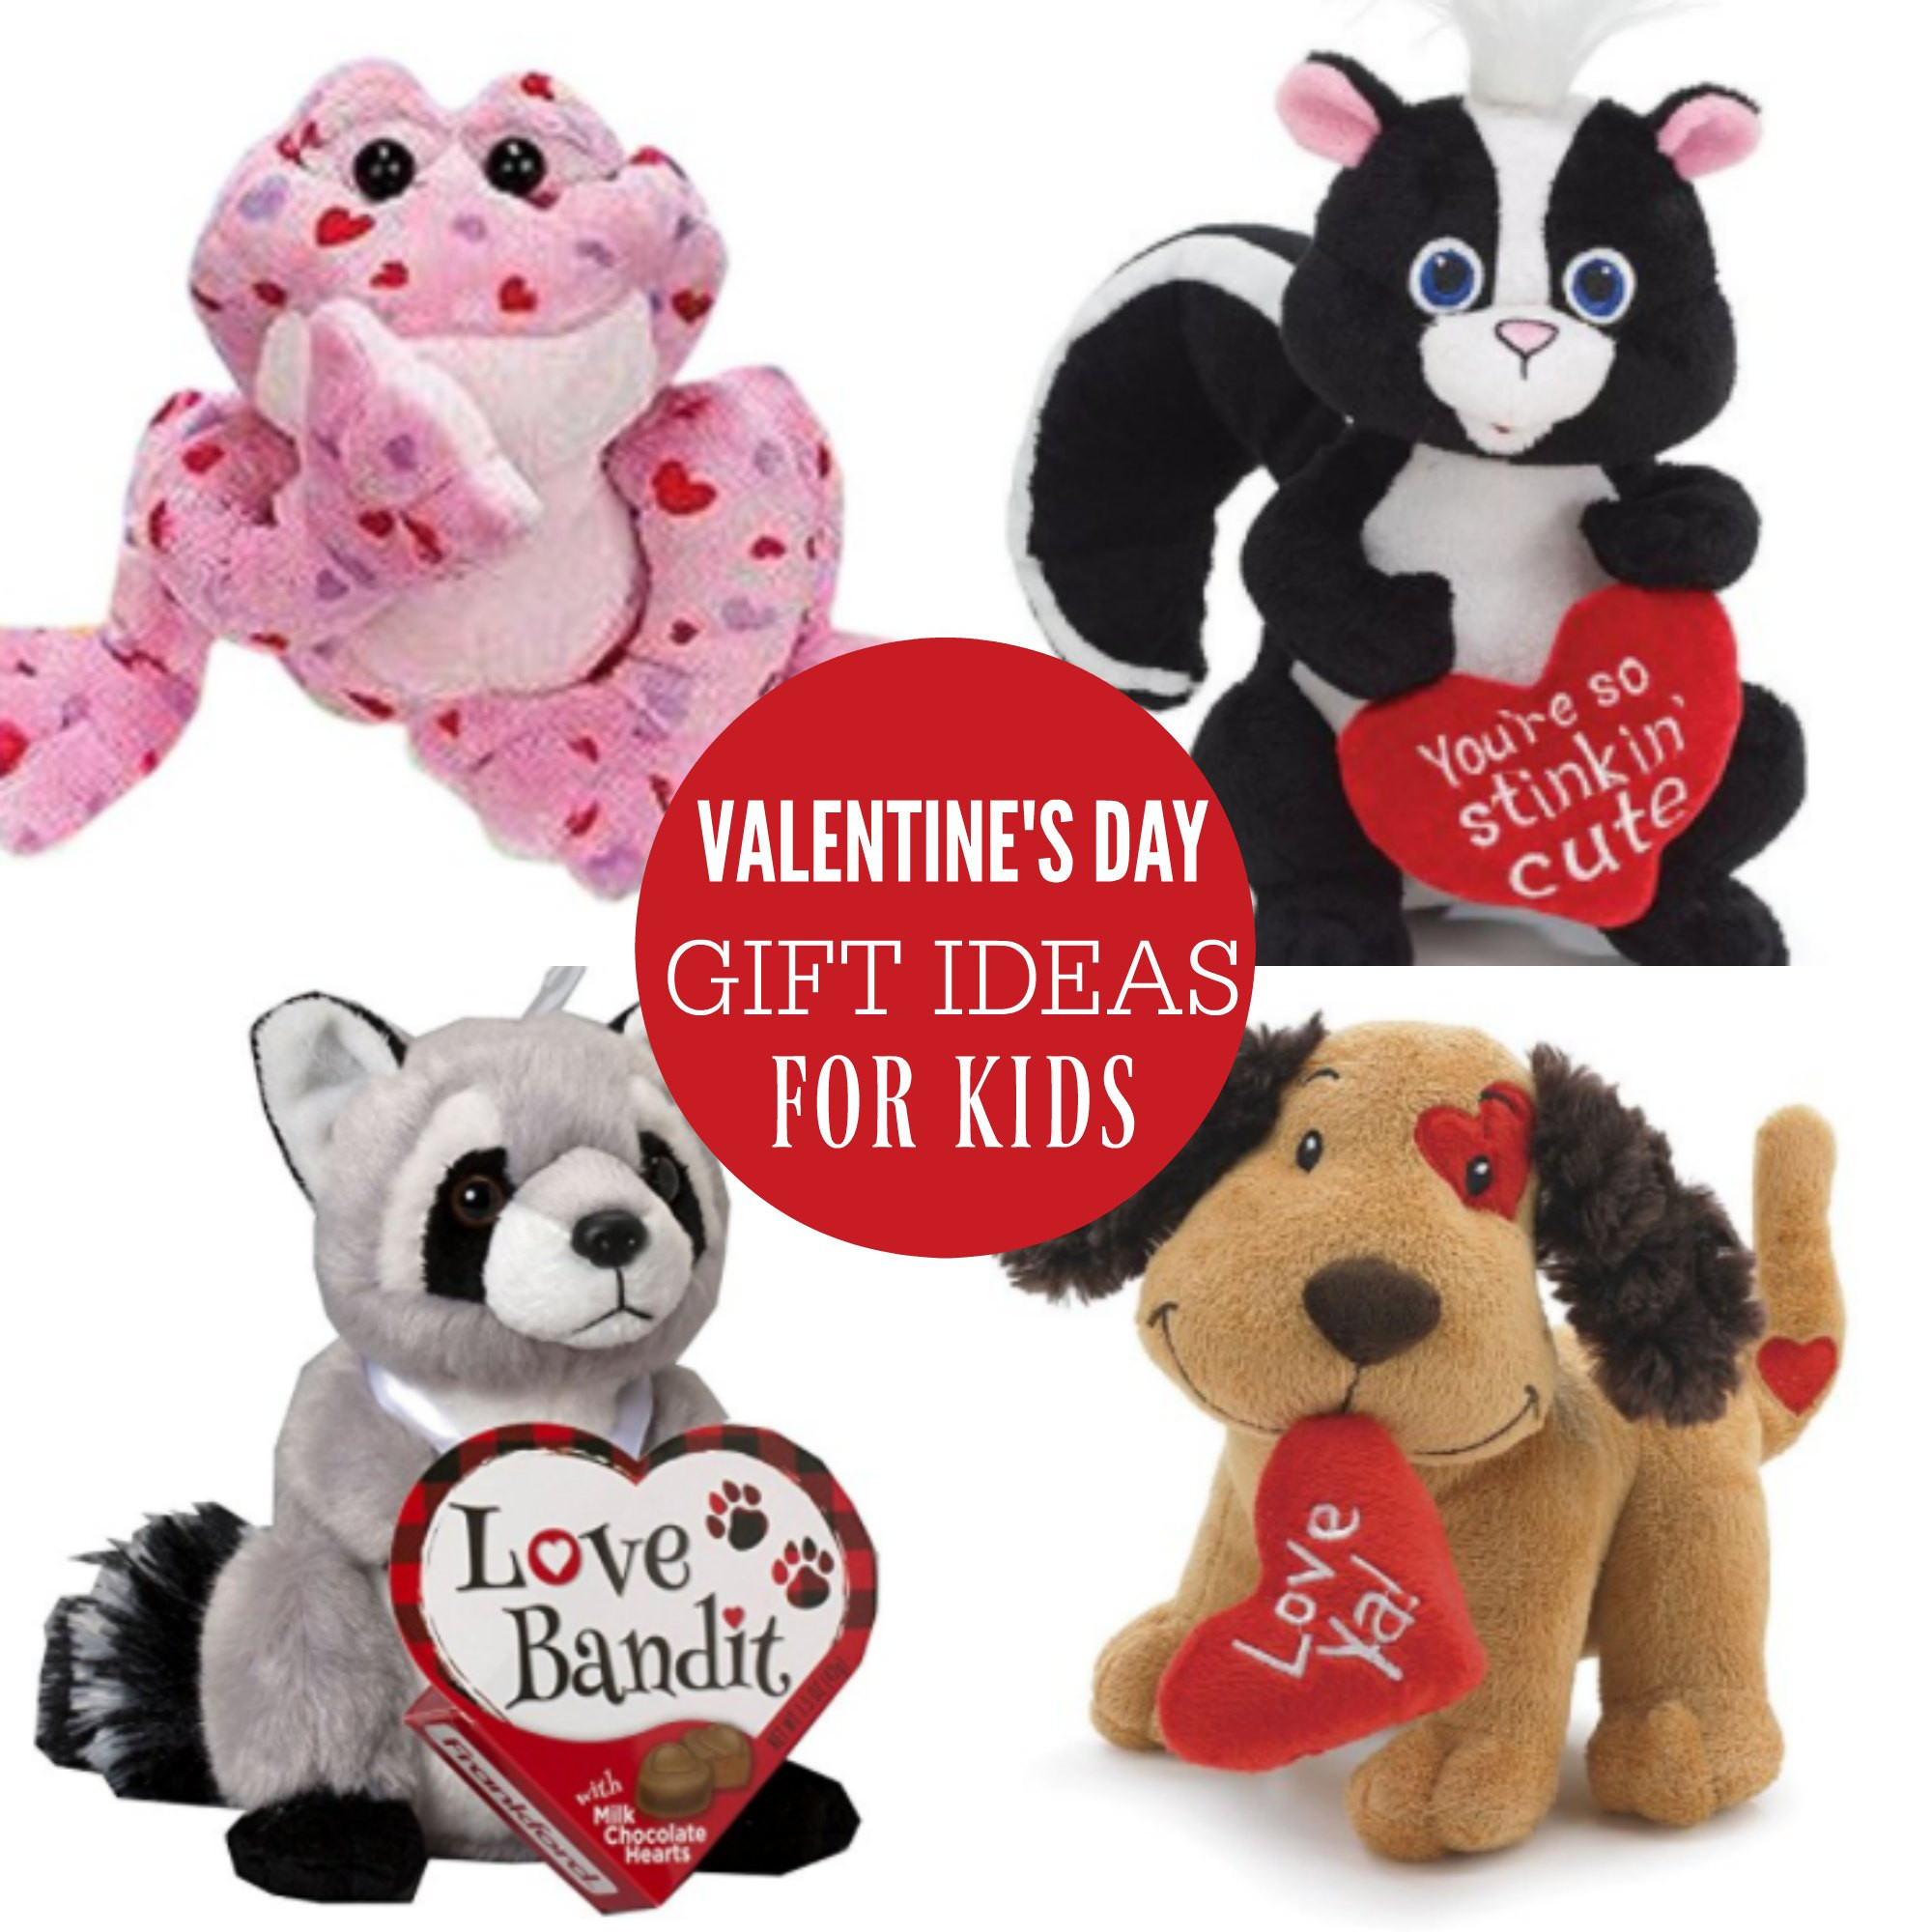 Valentines Gift Ideas For Toddlers
 Valentine Gift ideas for Kids That they will love